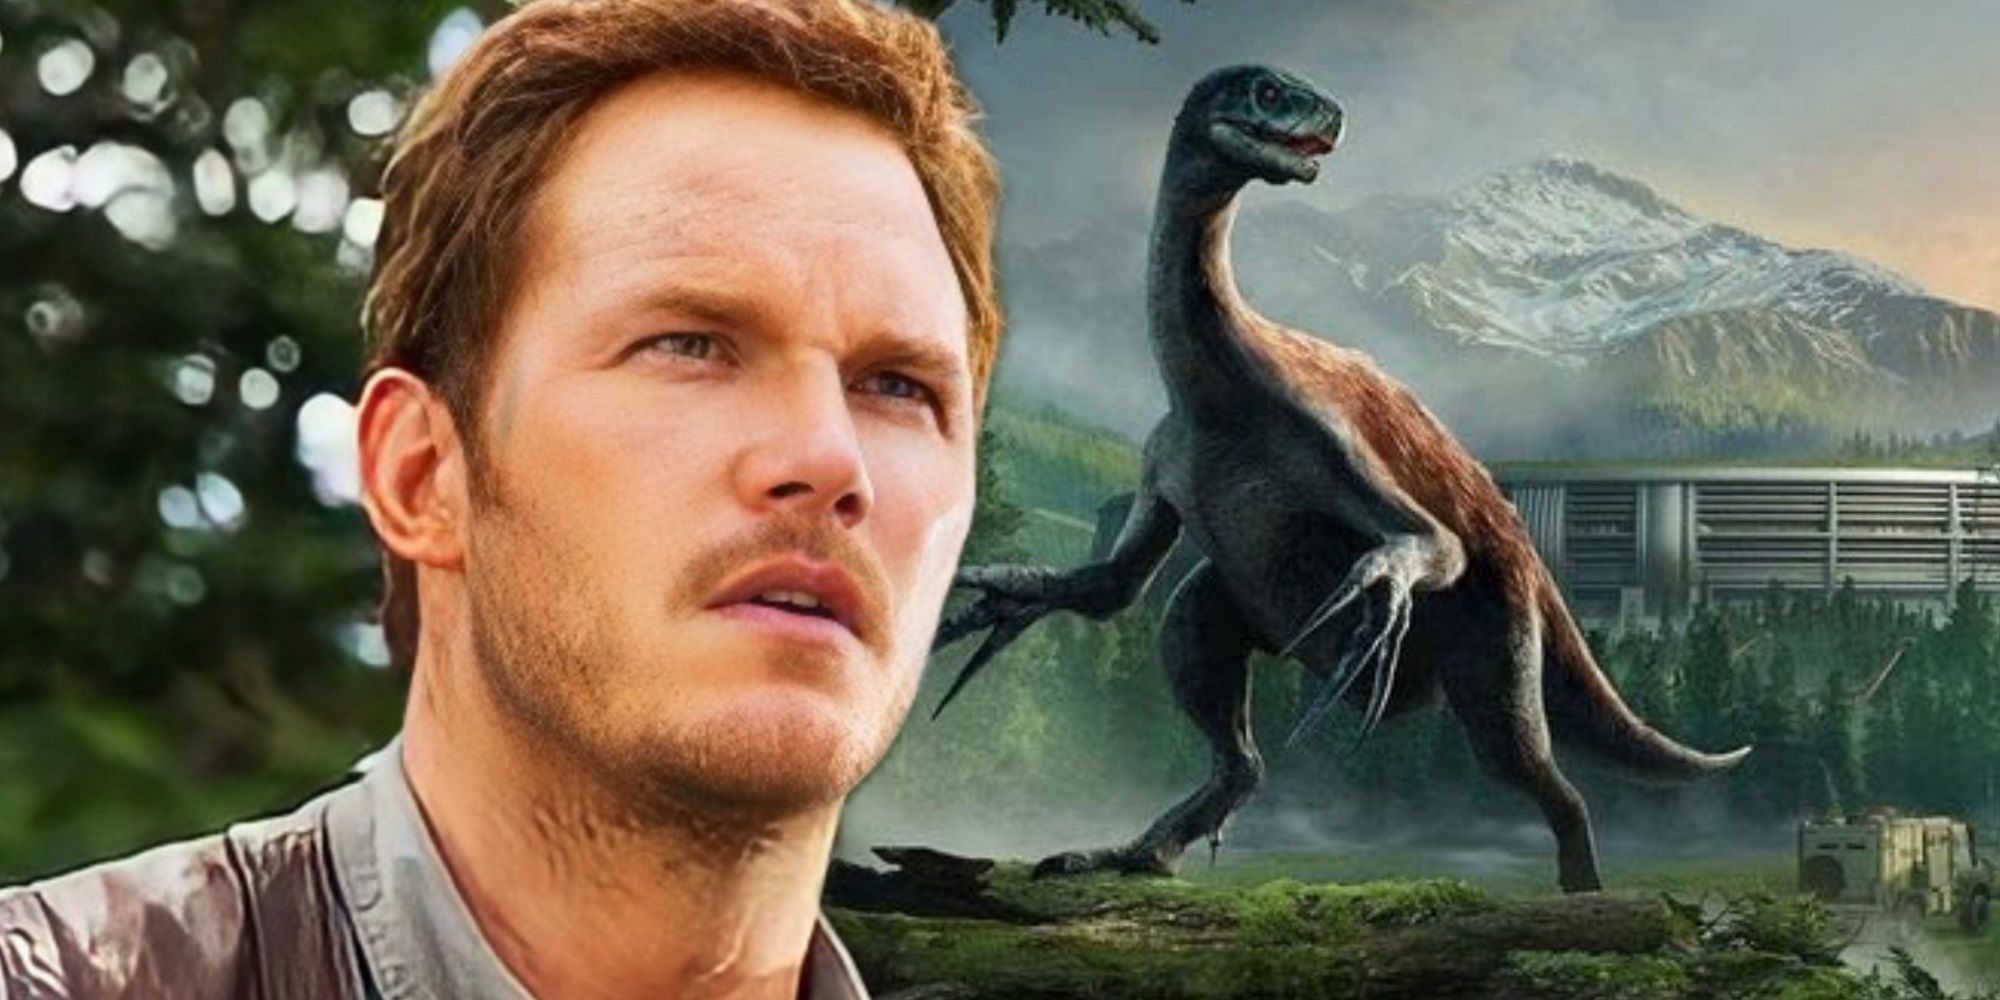 for android download Jurassic World: Dominion